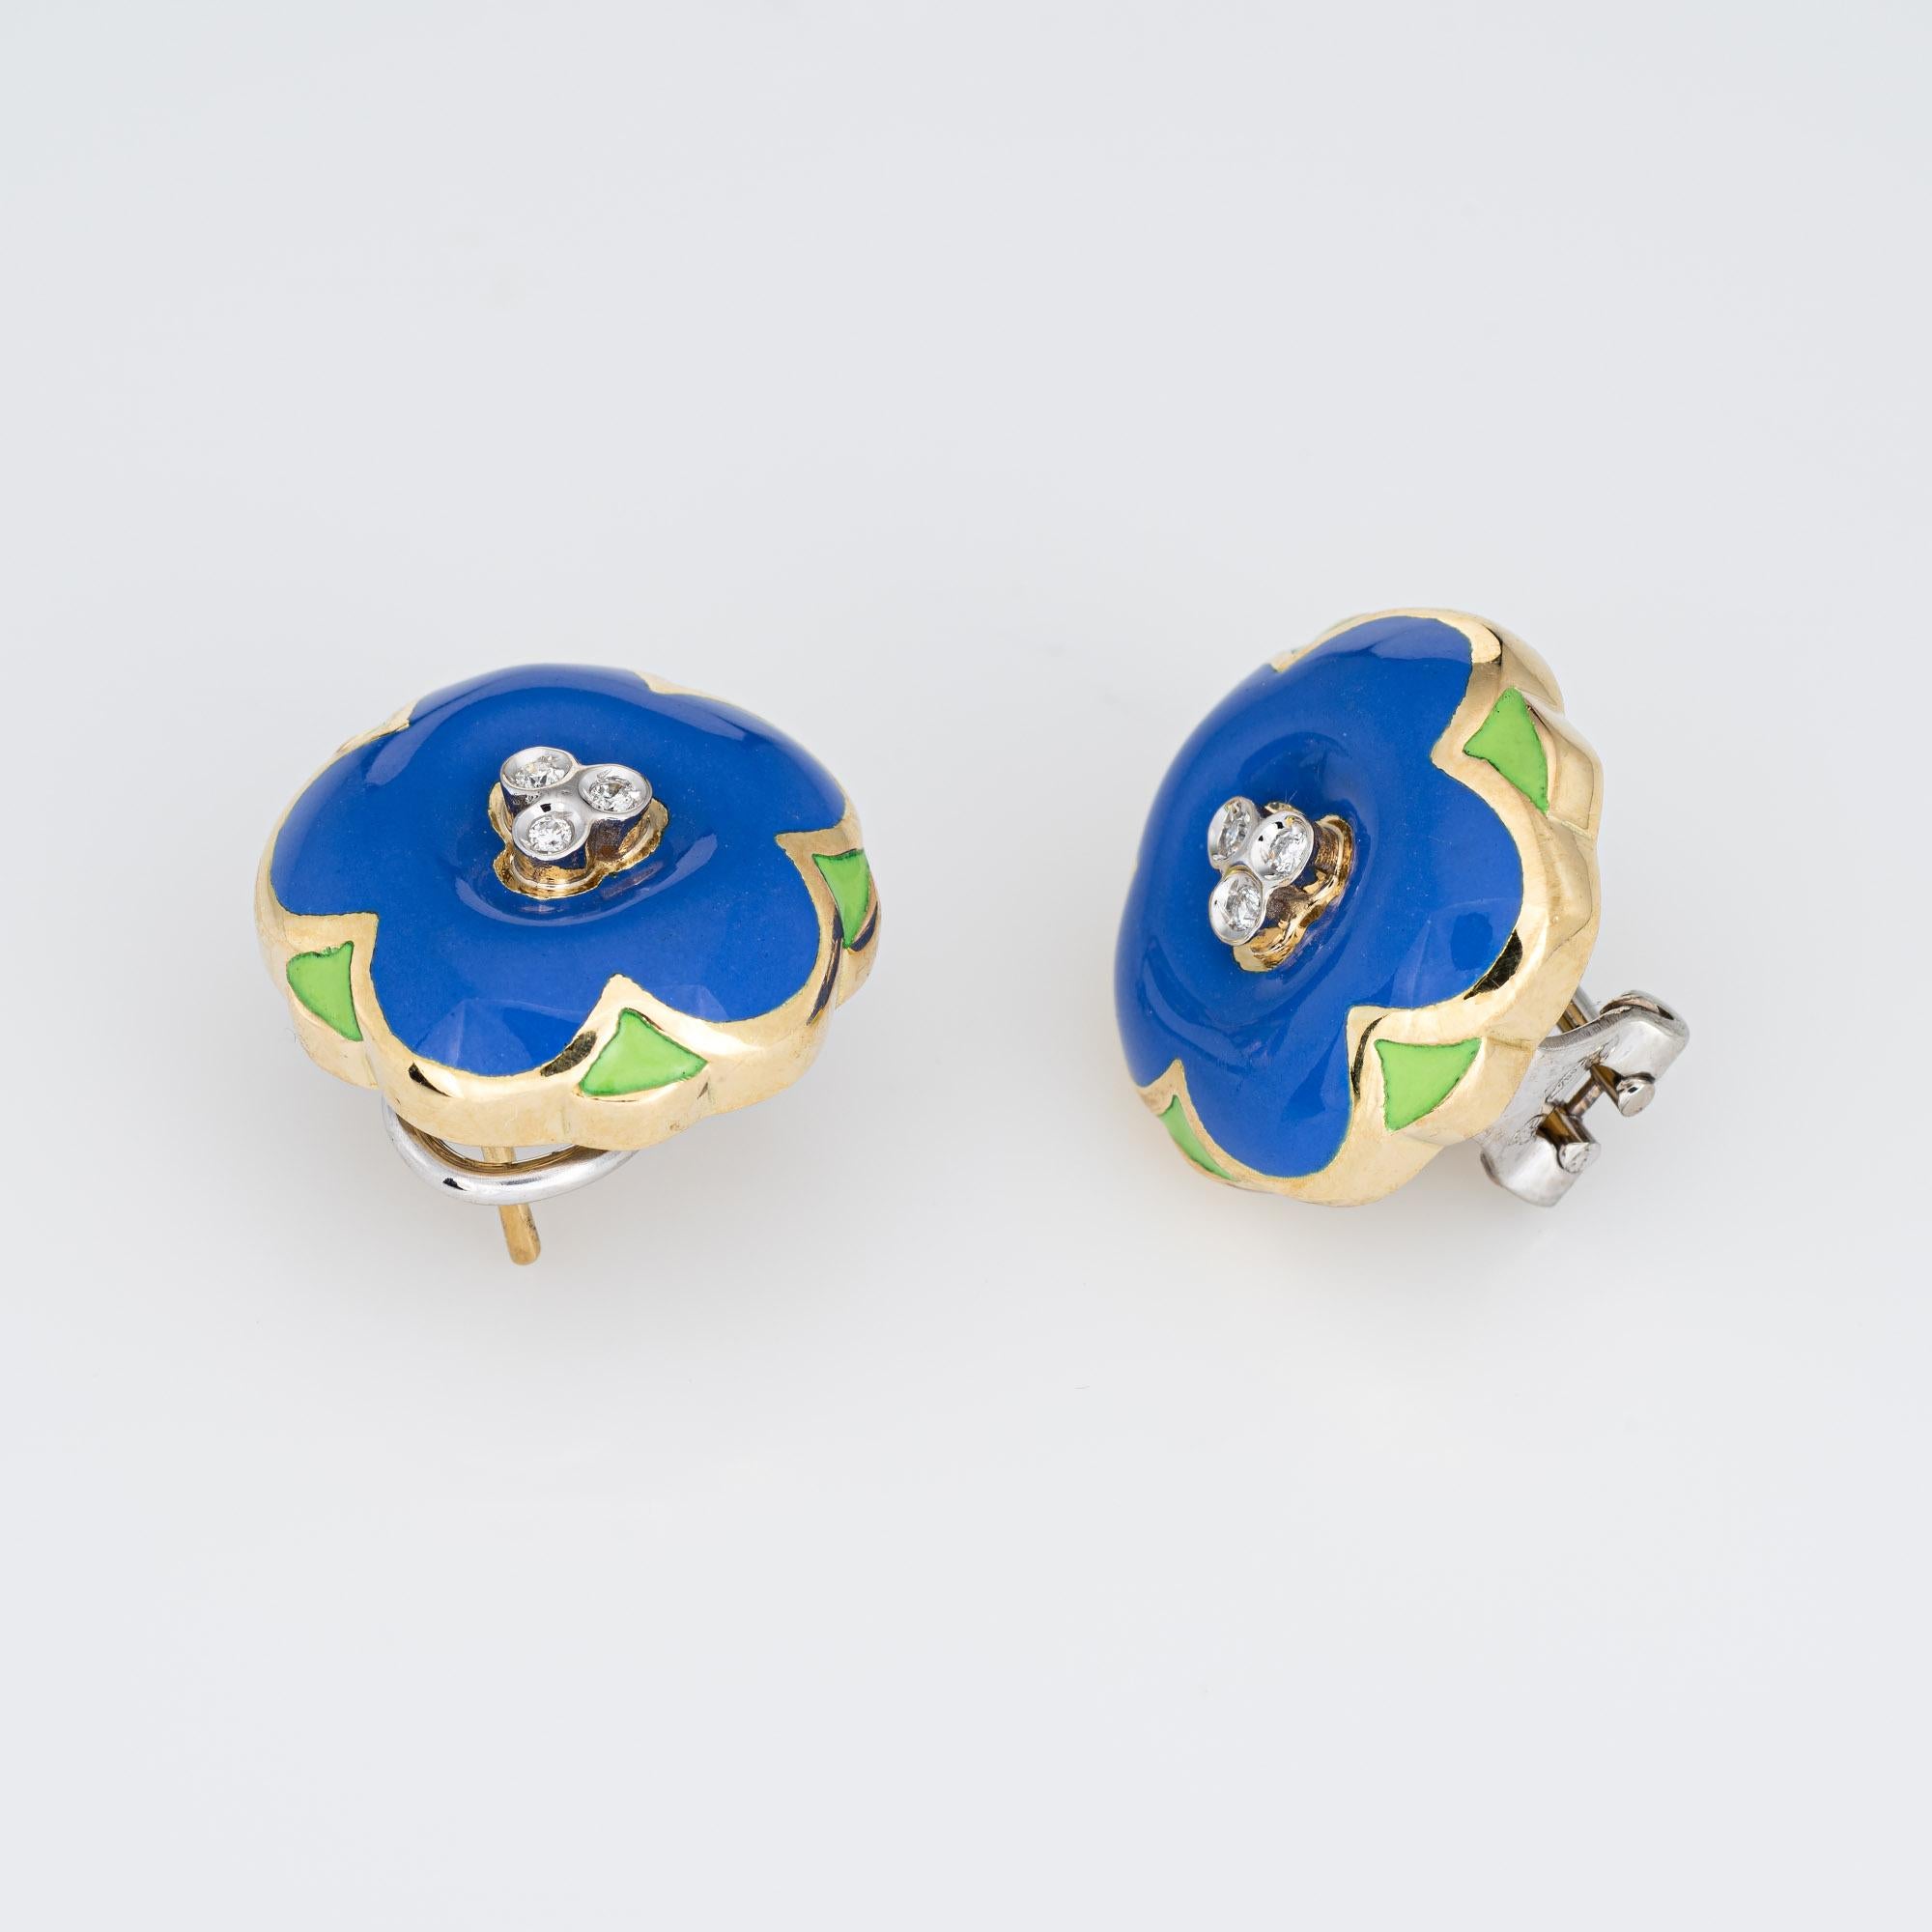 Elegant pair of vintage enamel diamond flower earrings crafted in 18k yellow gold. 

Six diamonds total an estimated 0.06 carats (estimated H-I color and SI1-2 clarity).  

The charming earrings feature purple and green enamel petals with diamonds